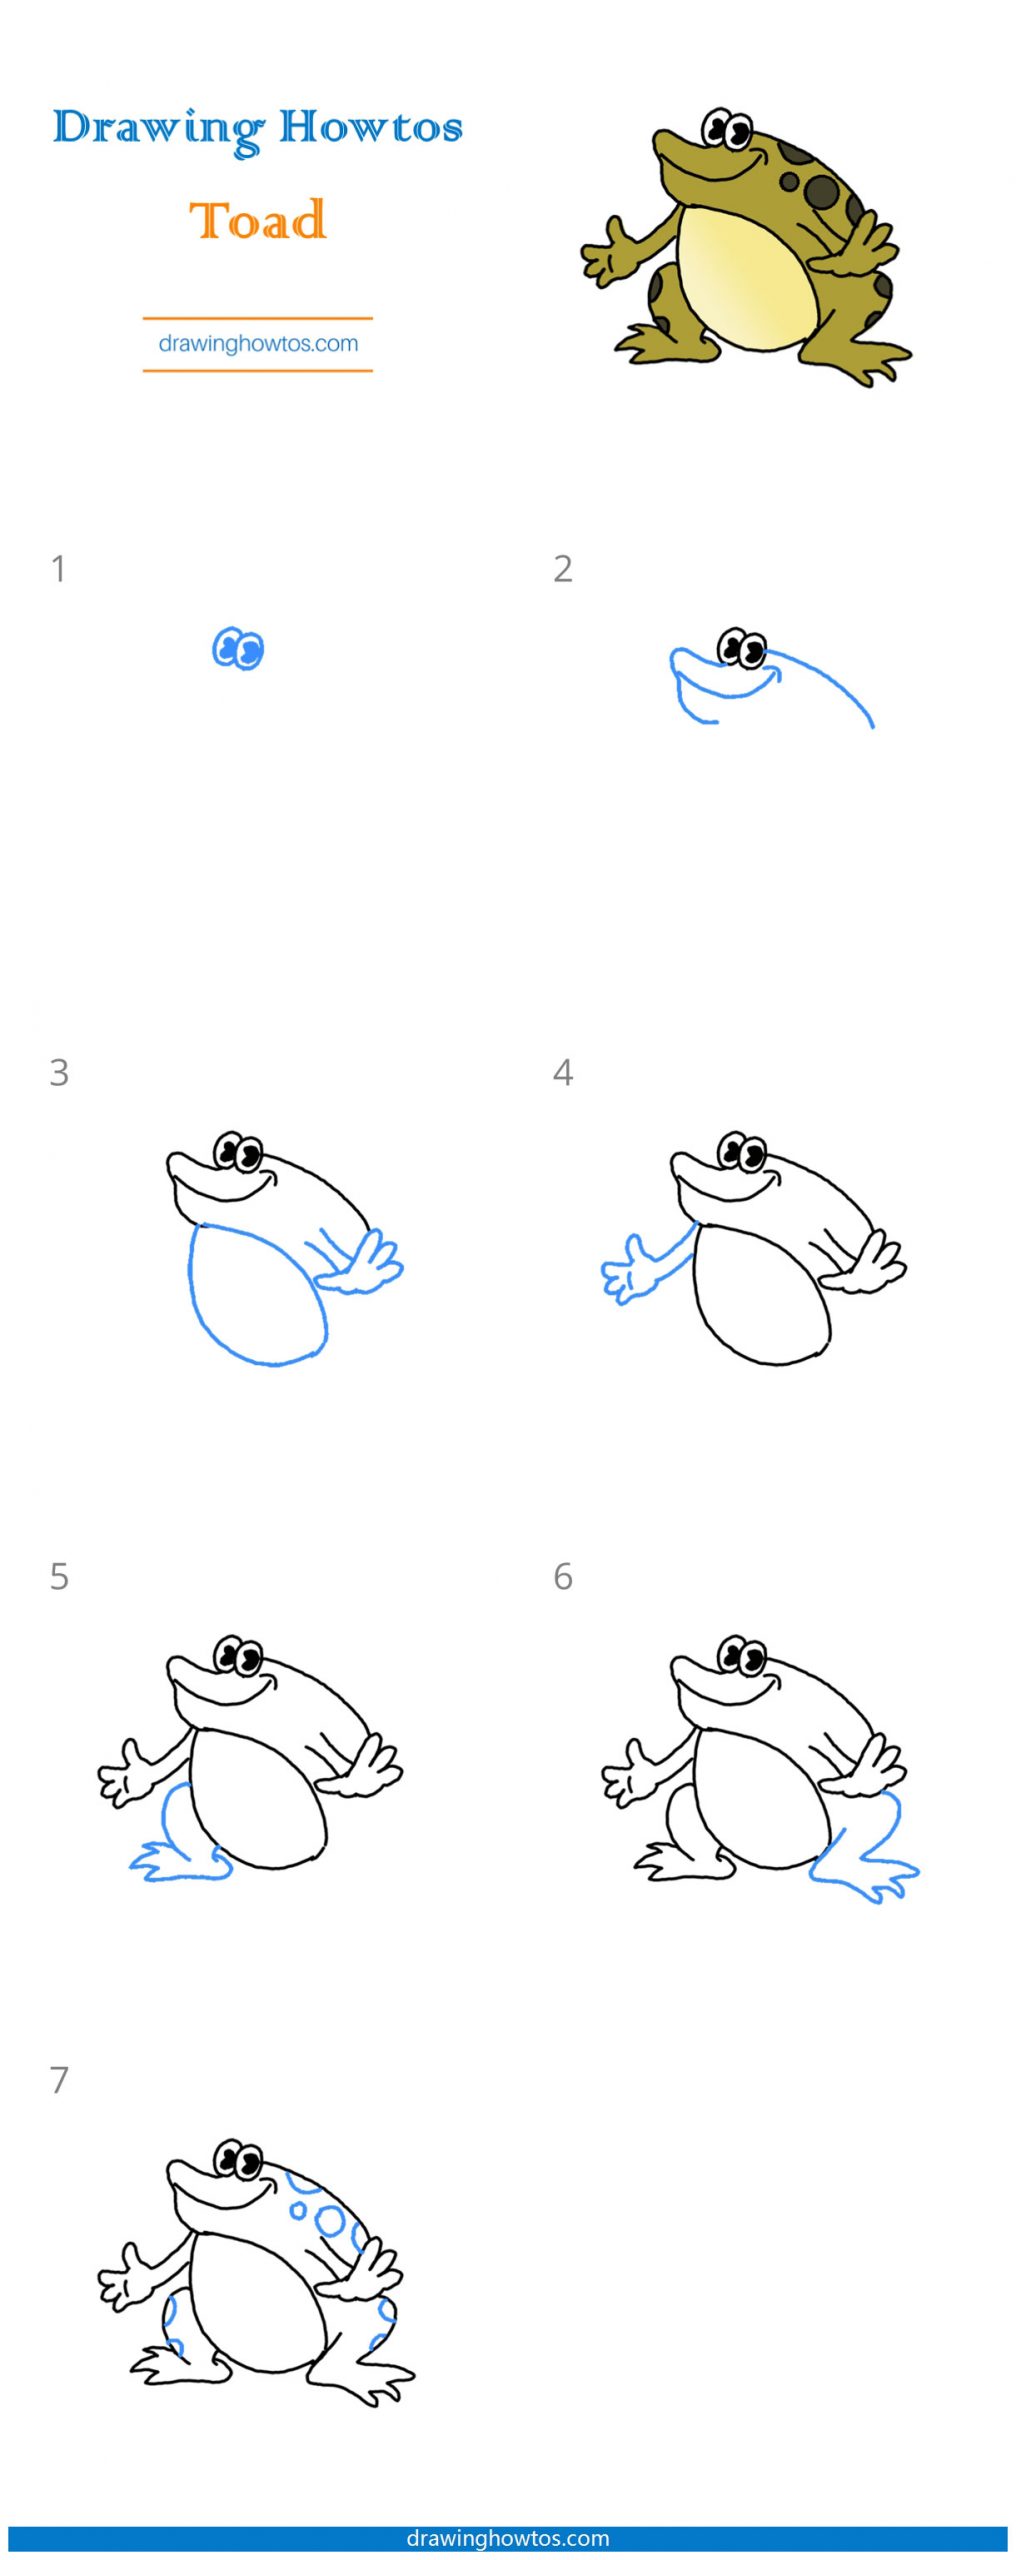 How to Draw a Toad Step by Step